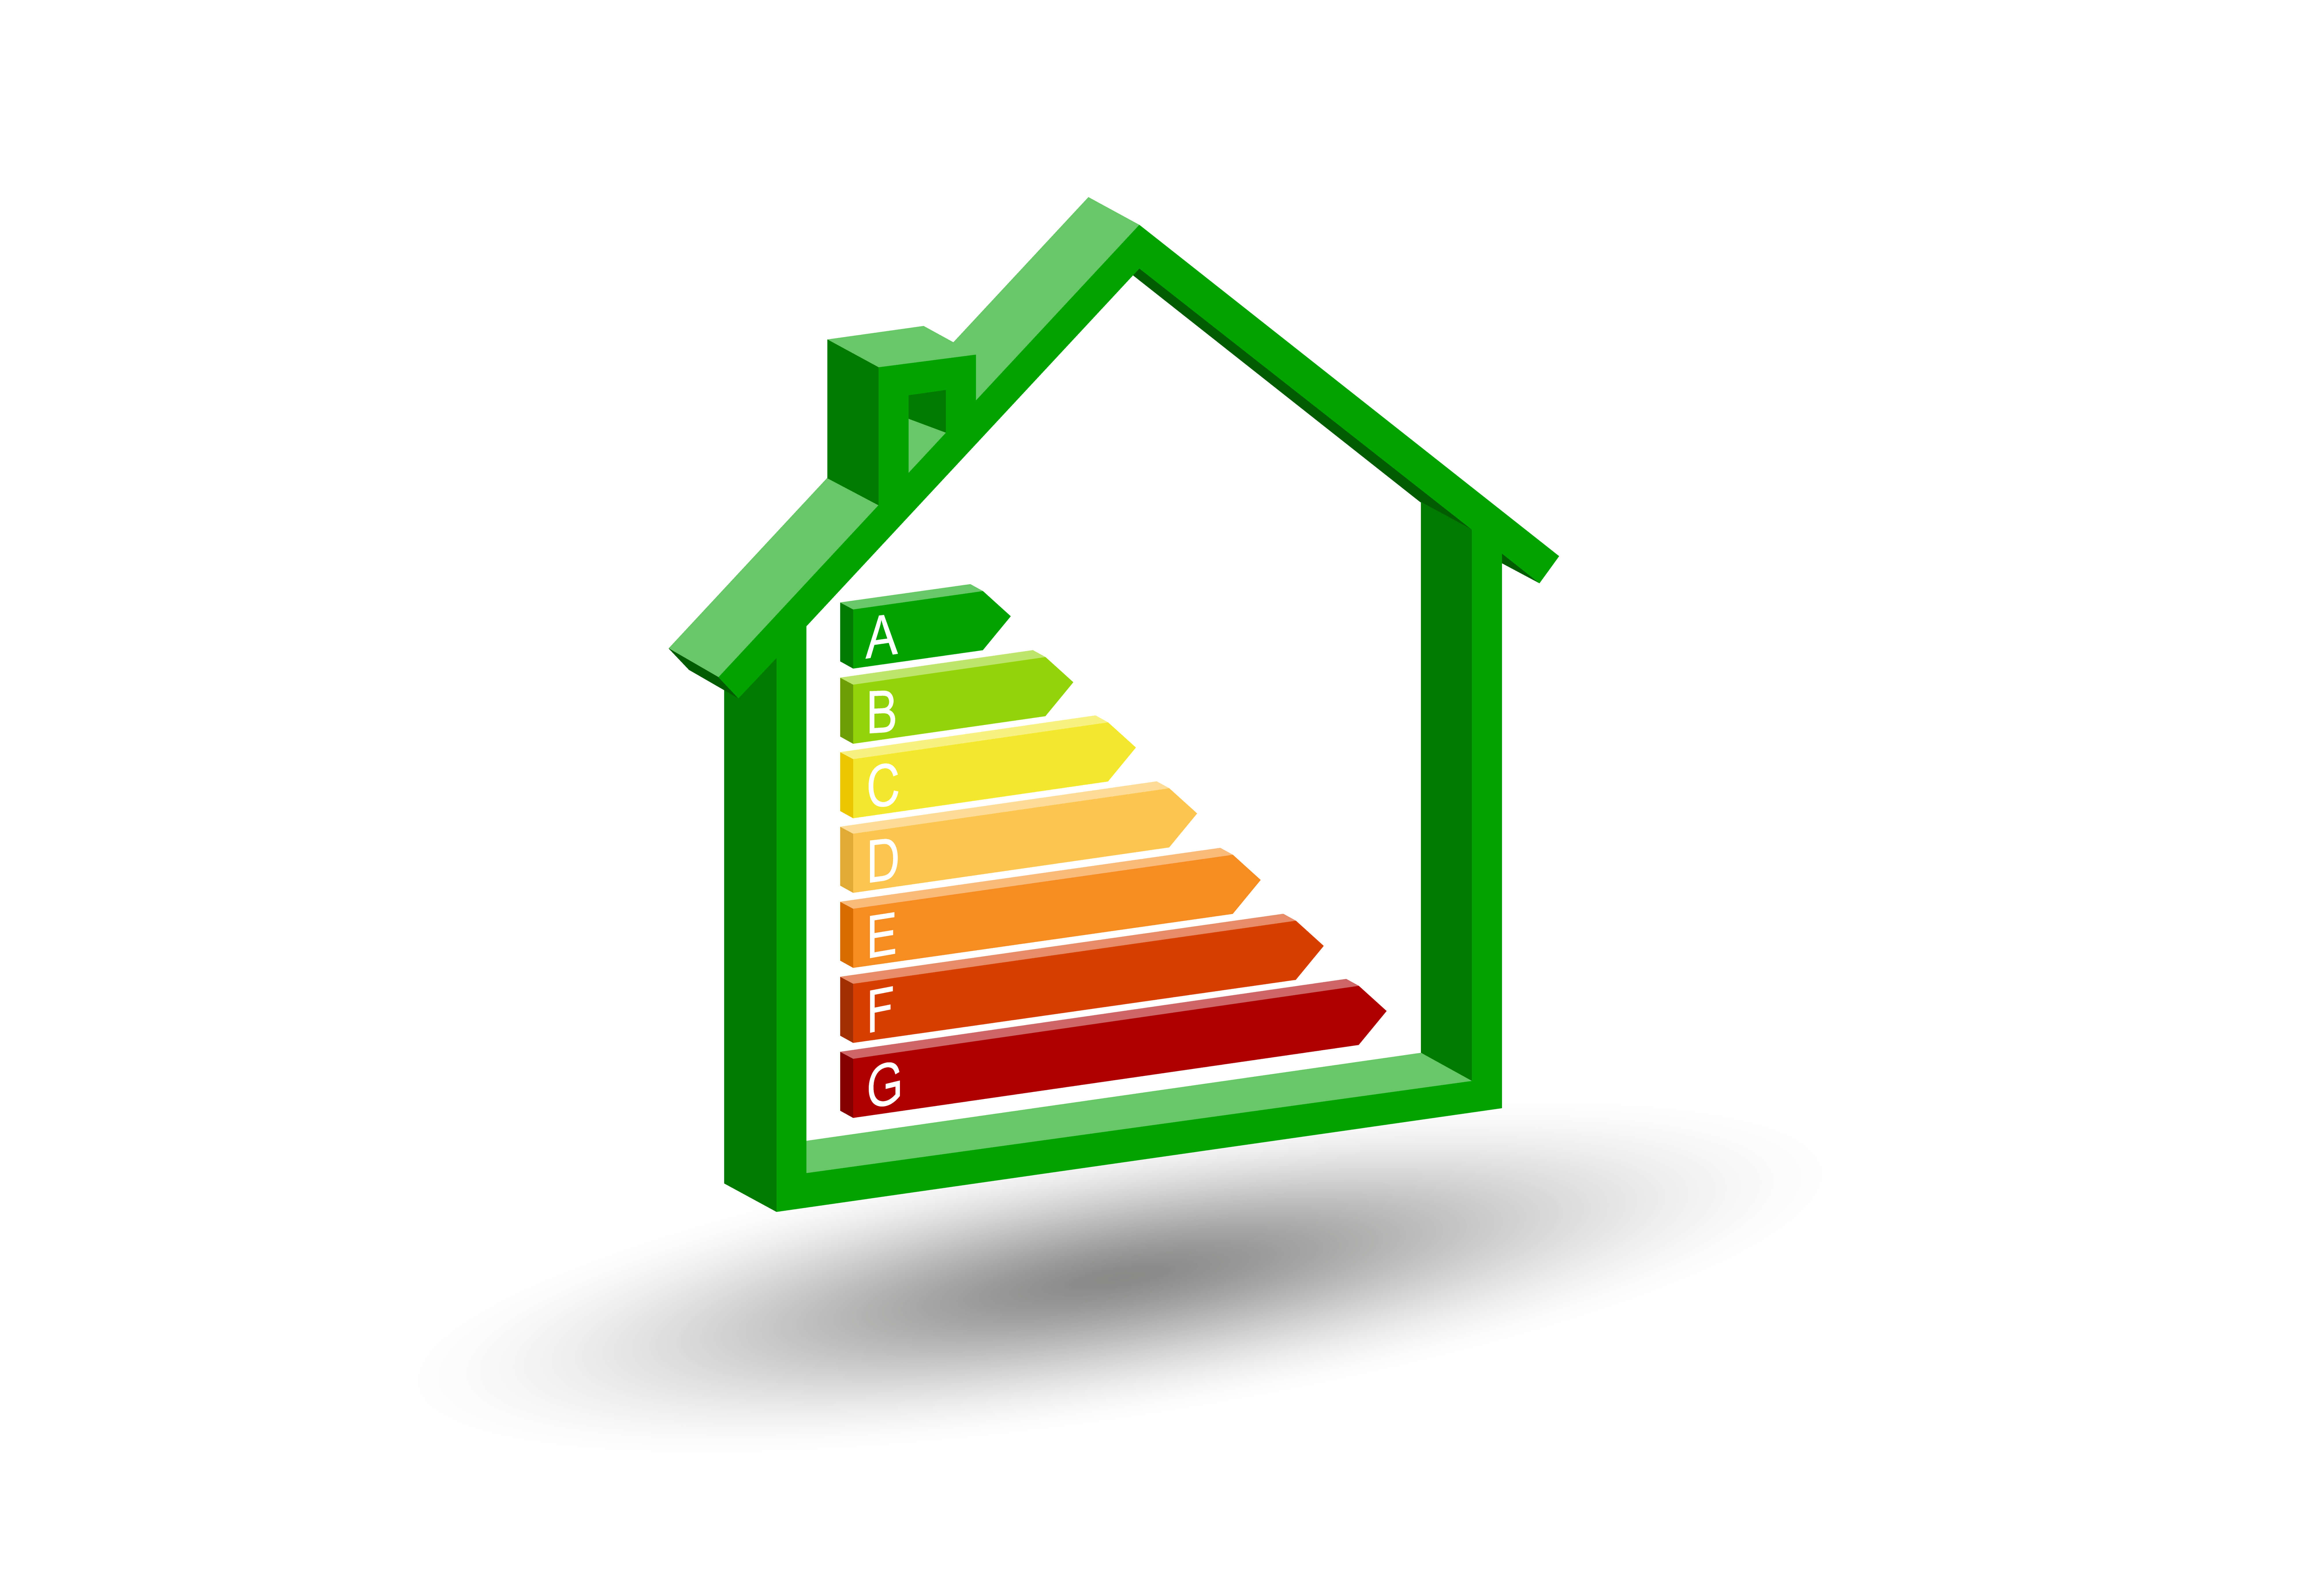 energy performance certificate ratings inside of green house shape and white backround